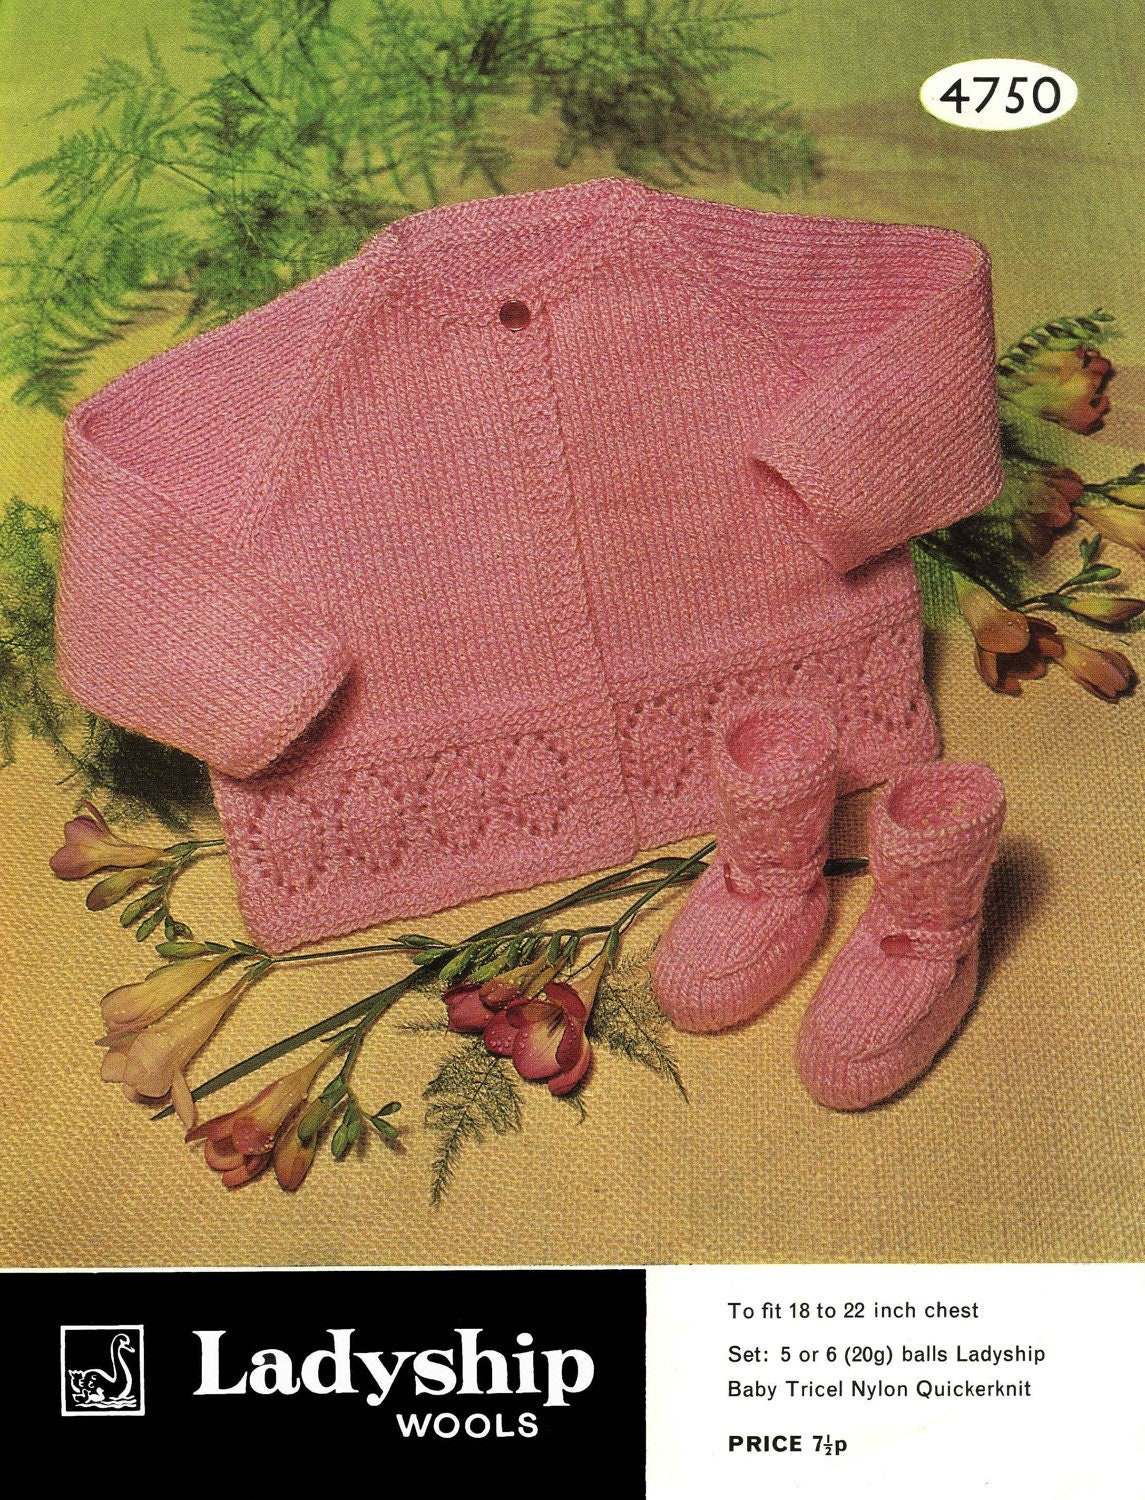 Baby Matinee Coat / Cardigan and Bootees, 18"-22" Chest, 4ply, 70s Knitting Pattern, Ladyship 4750